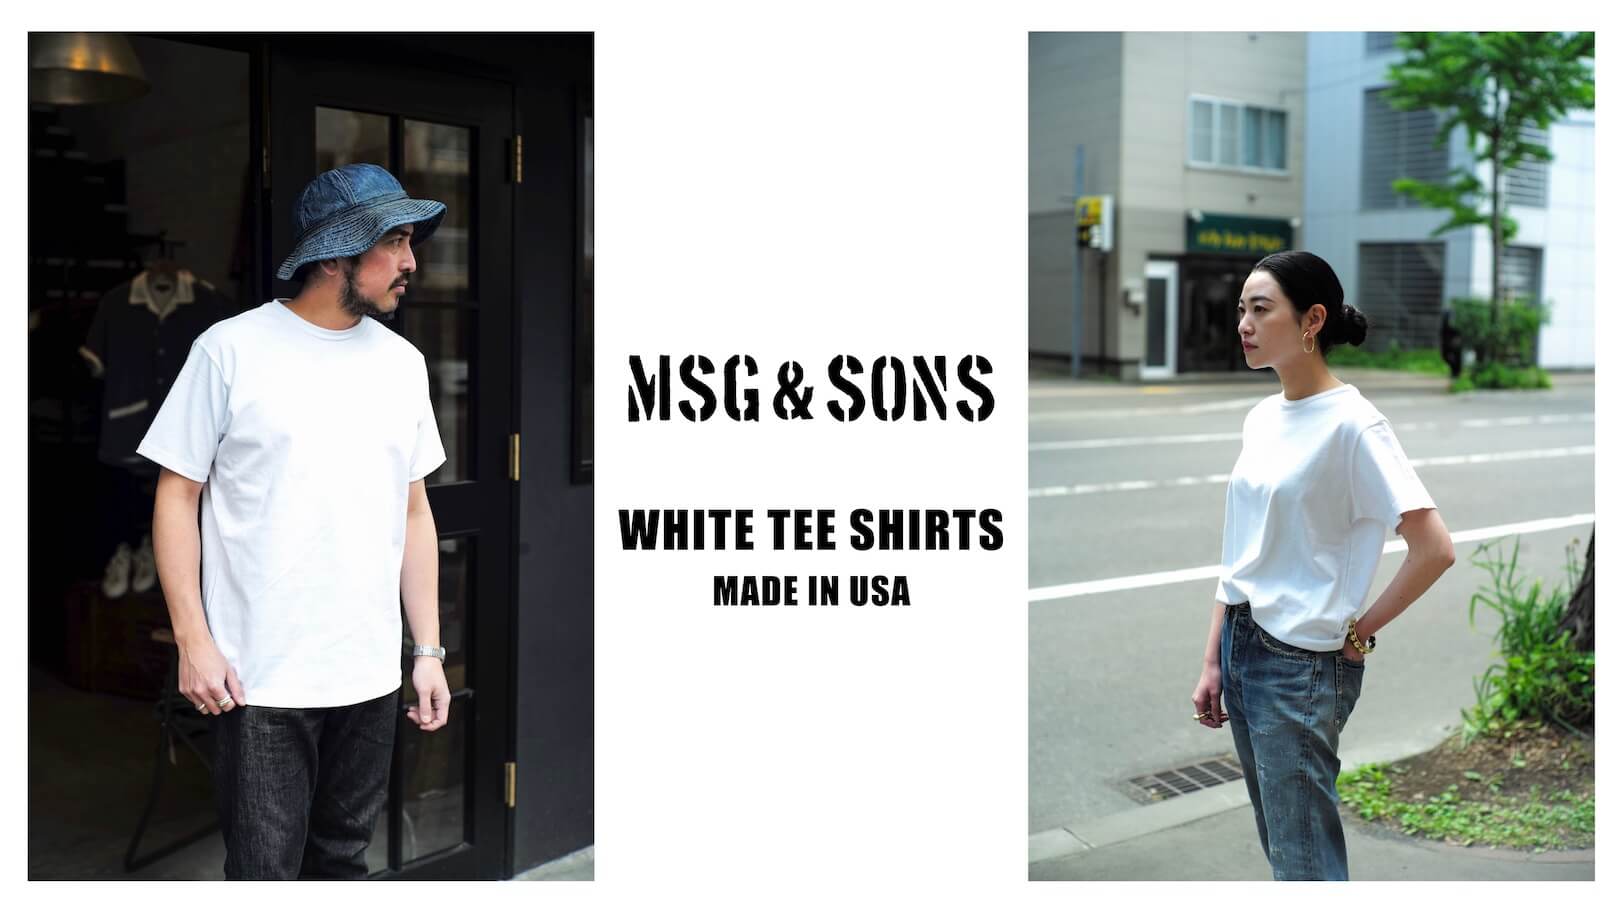 MSG & SONS WHITE TEE SHIRTS – MADE IN USA